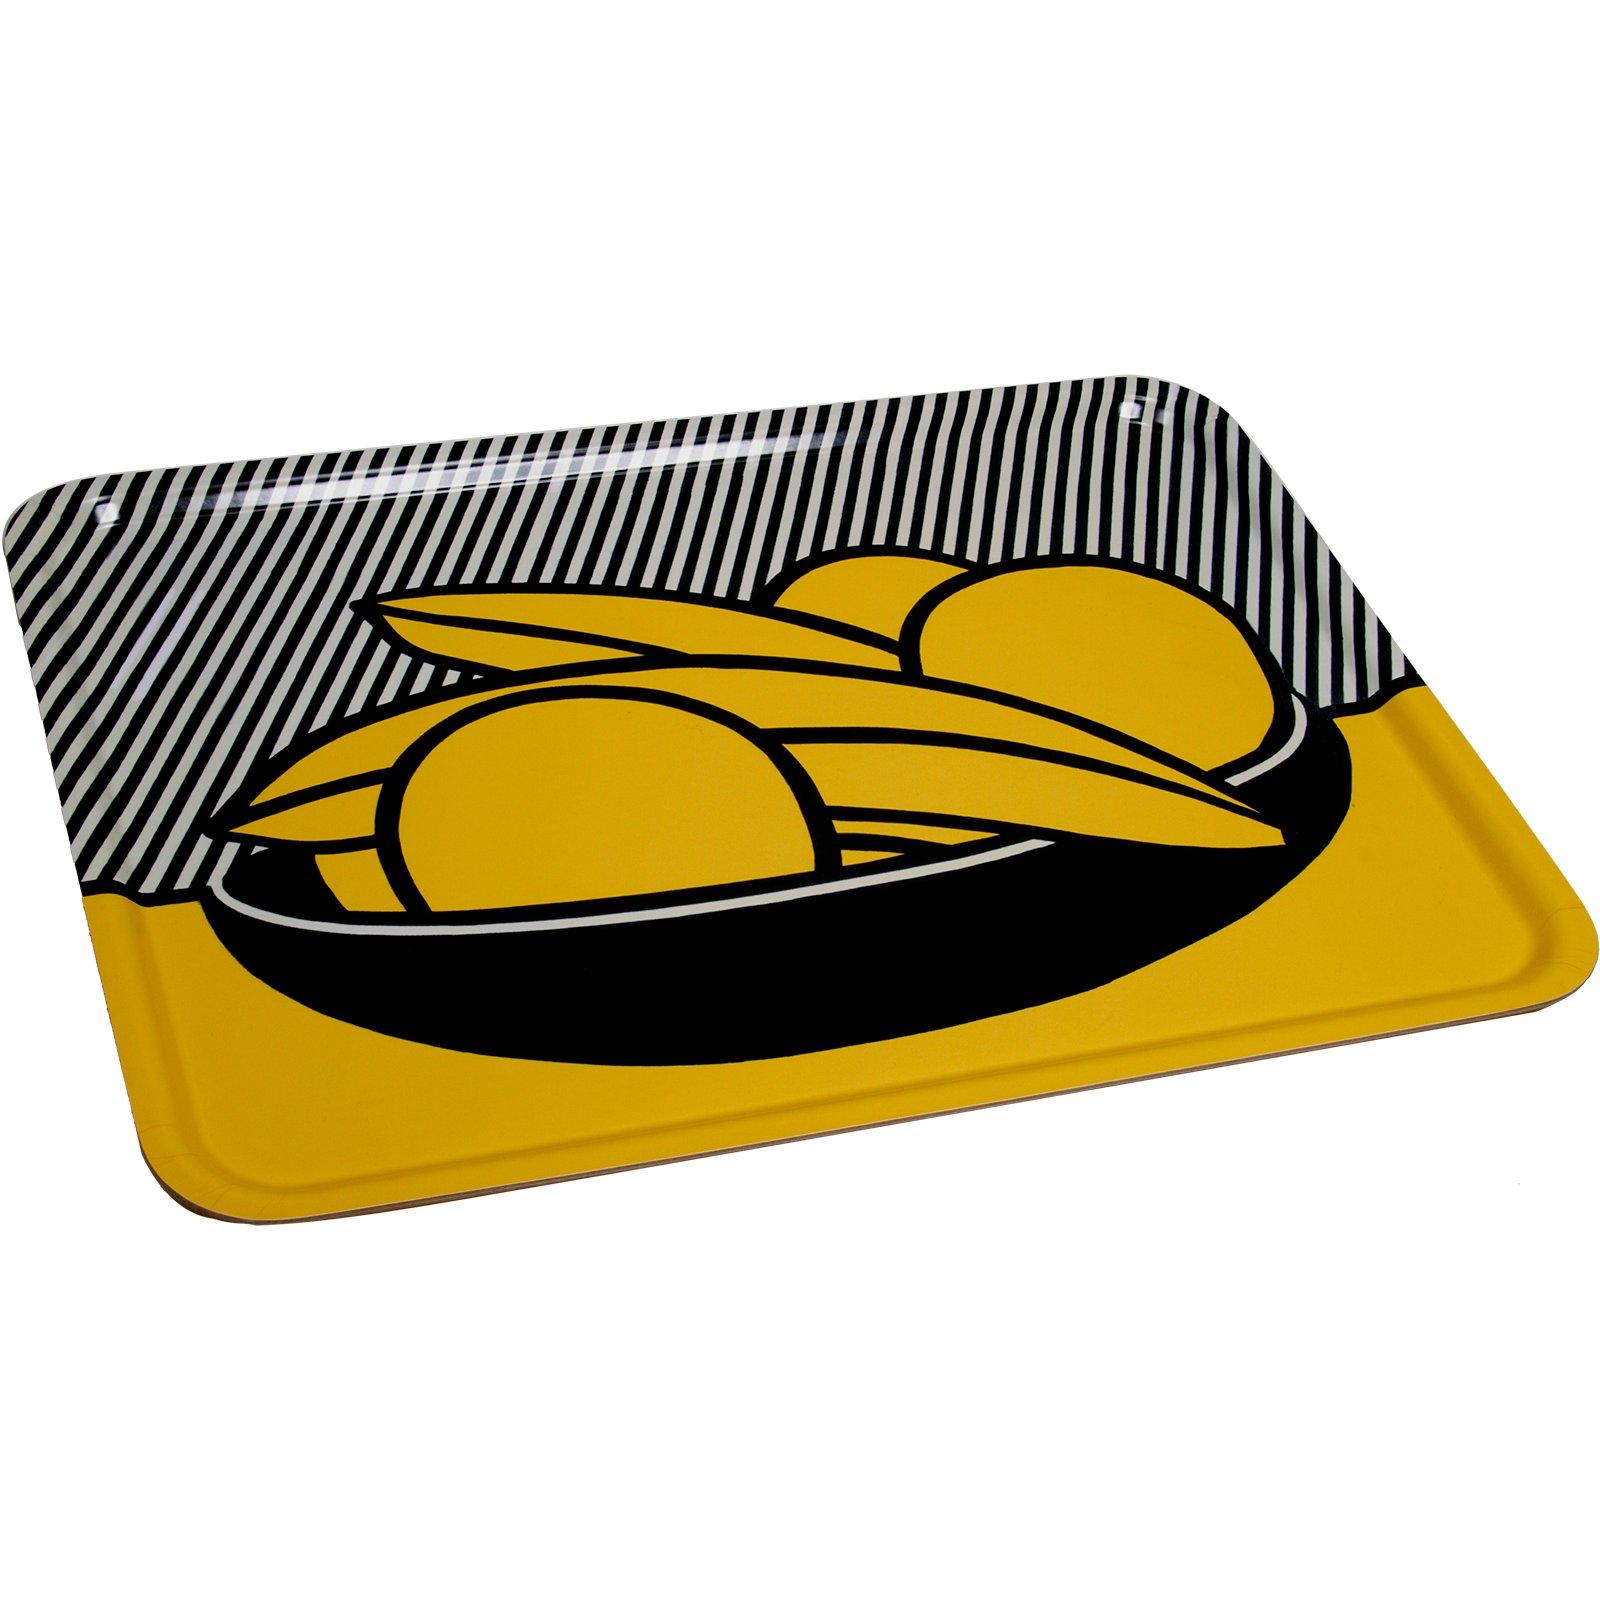 Roy Lichtenstein
Bananas and grapefruit tray (large)
measures: 17 3/4 x 23 2/3